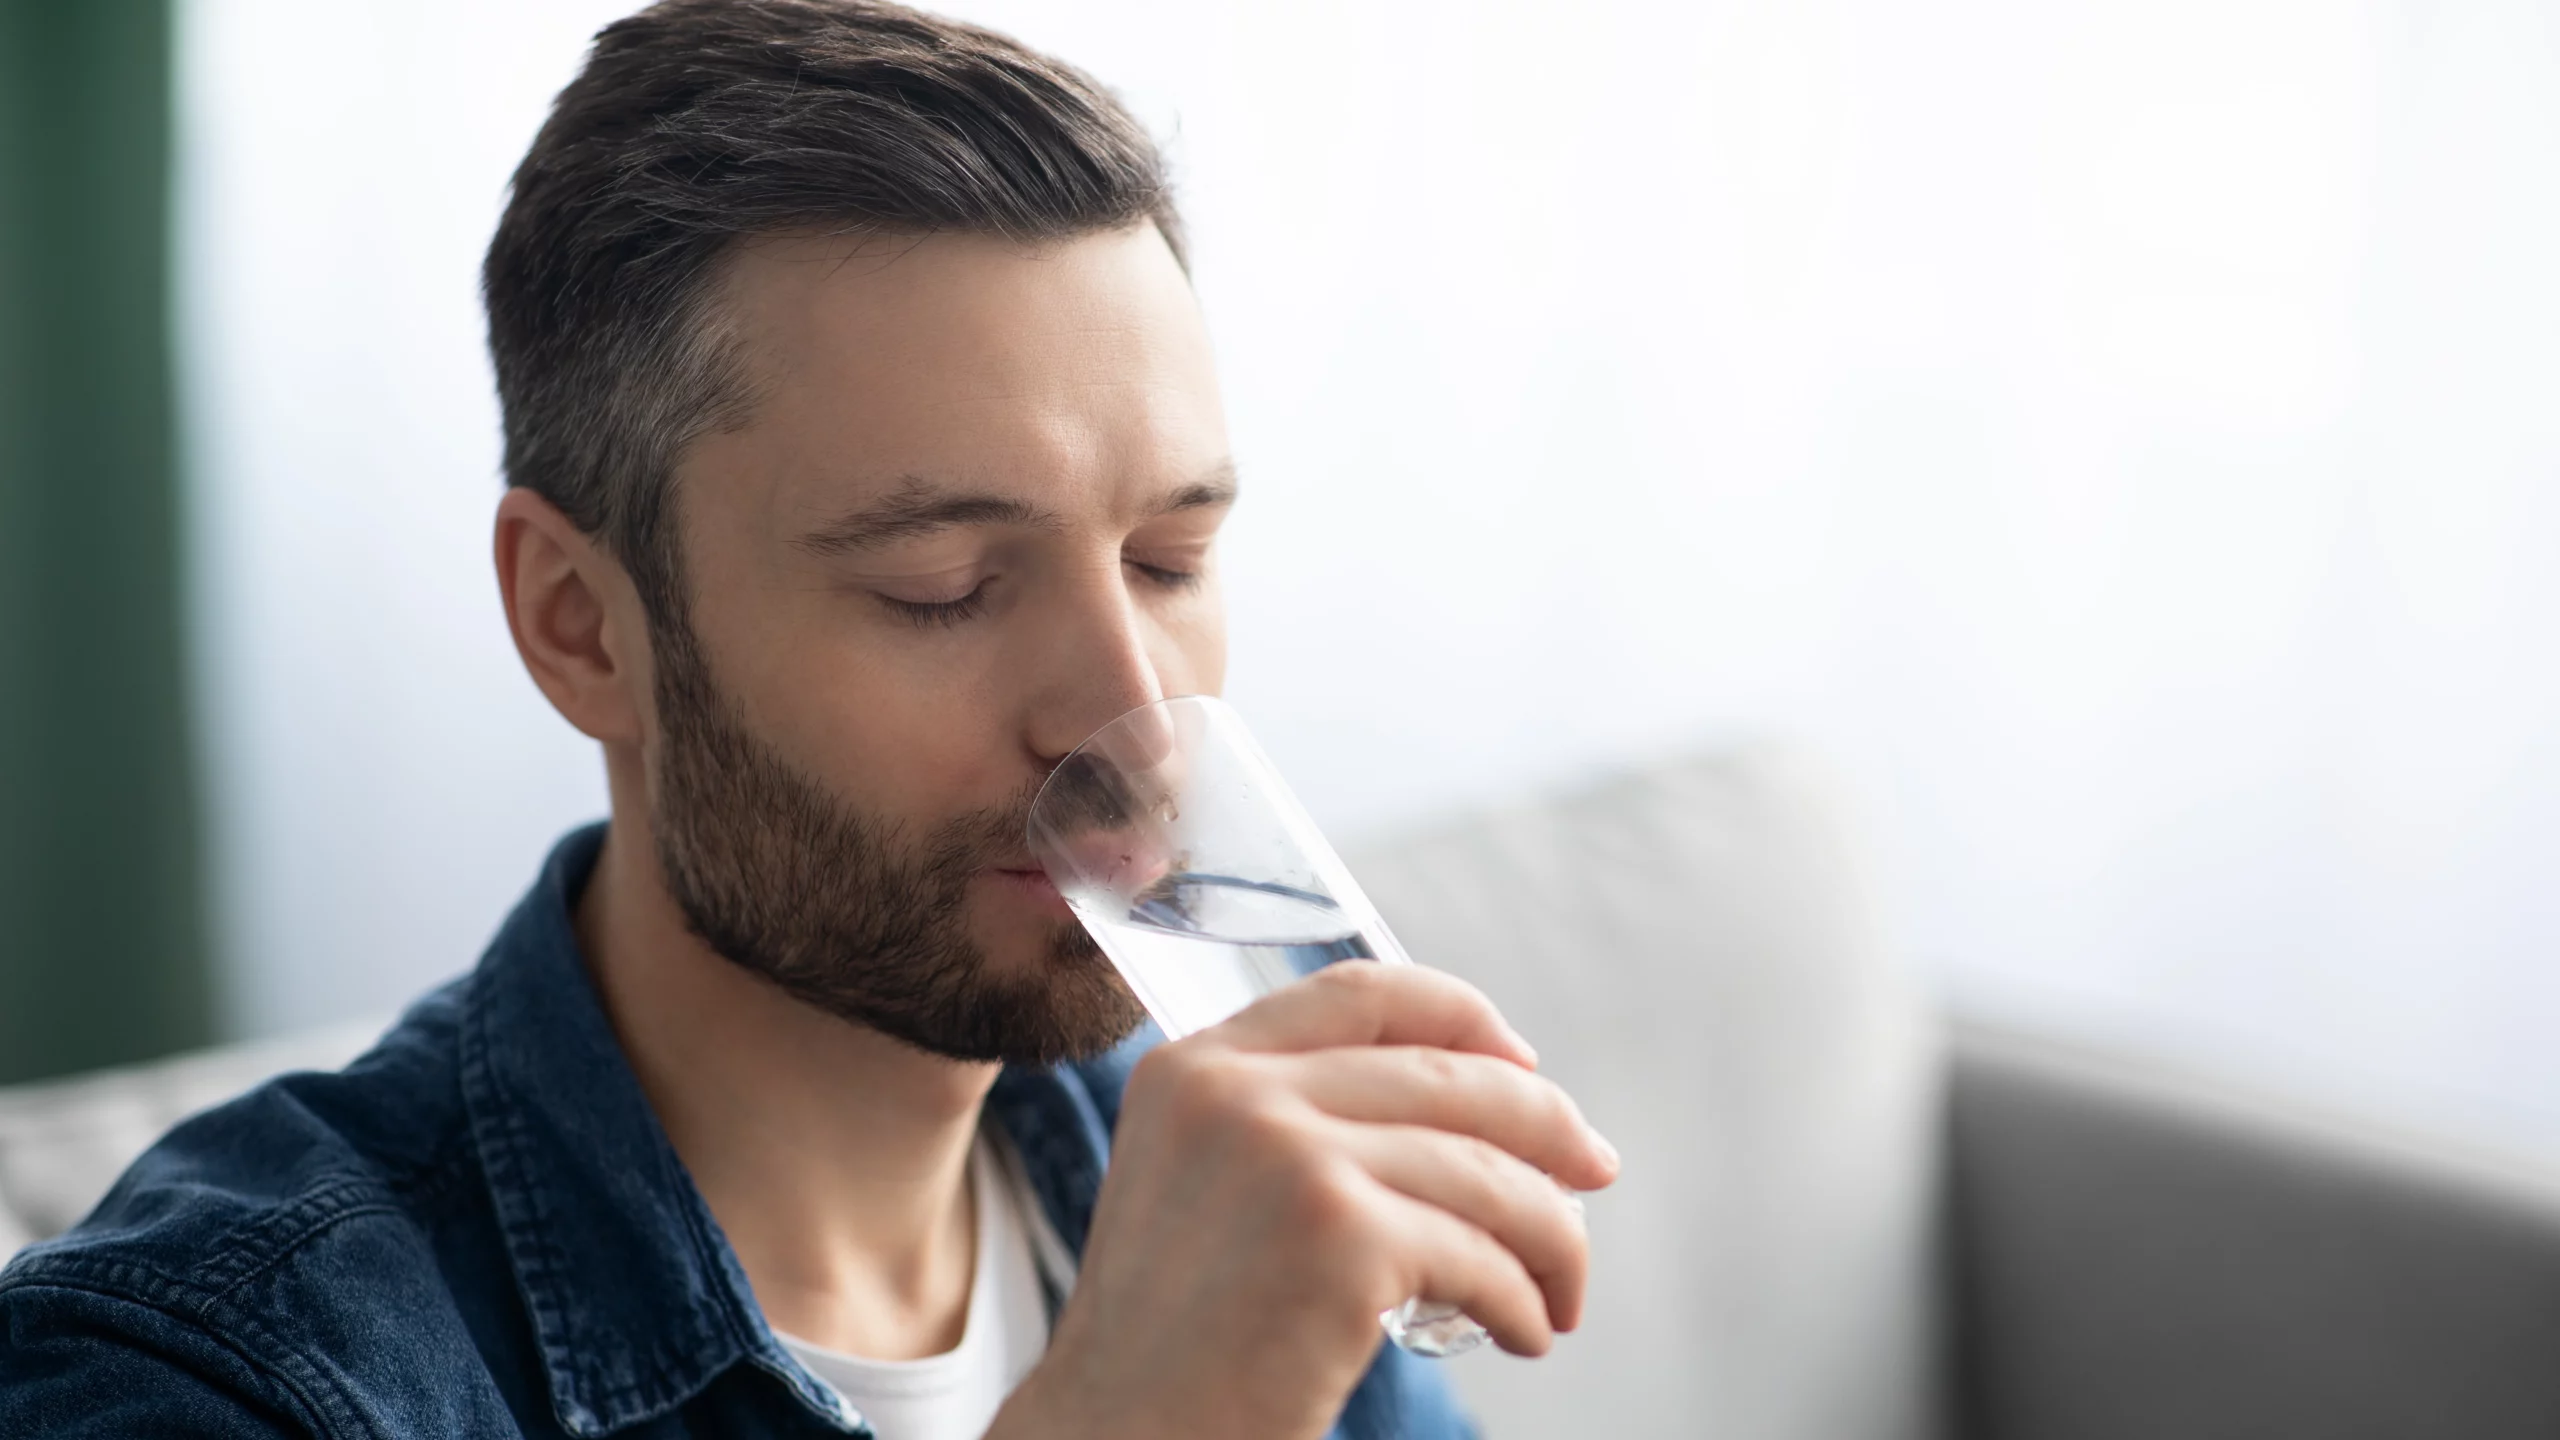 Man with beard drinking a glass of water.